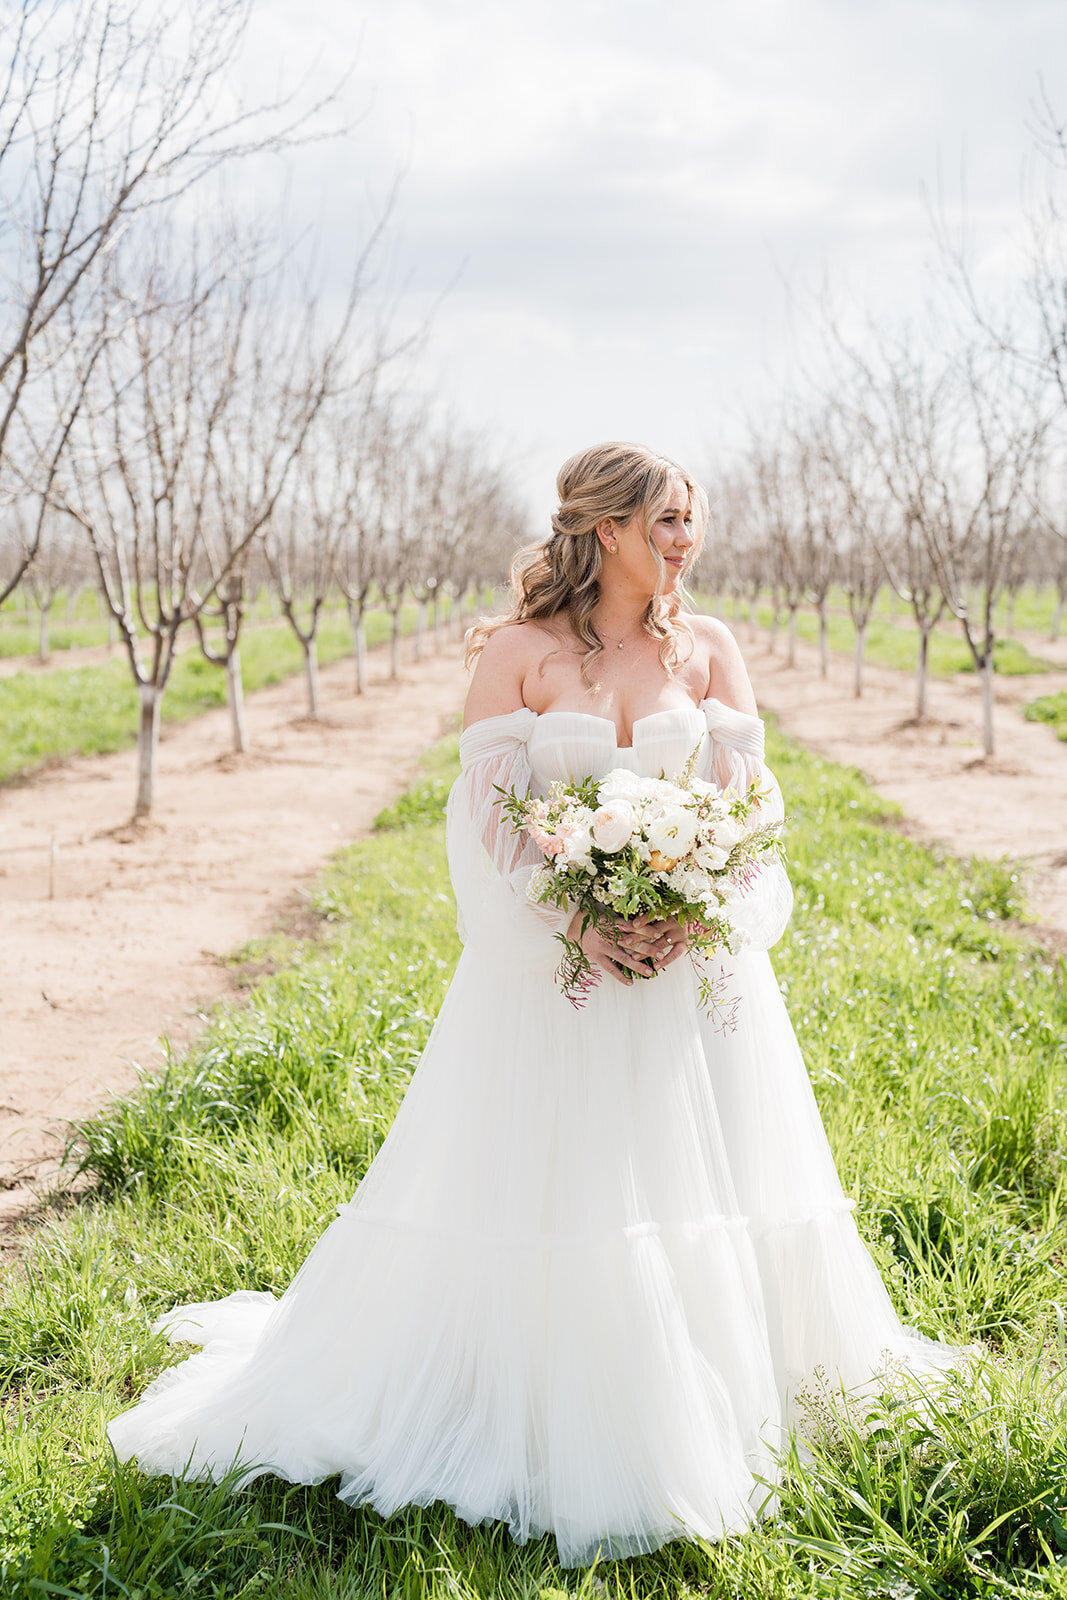 Bridal Portrait in an orchard